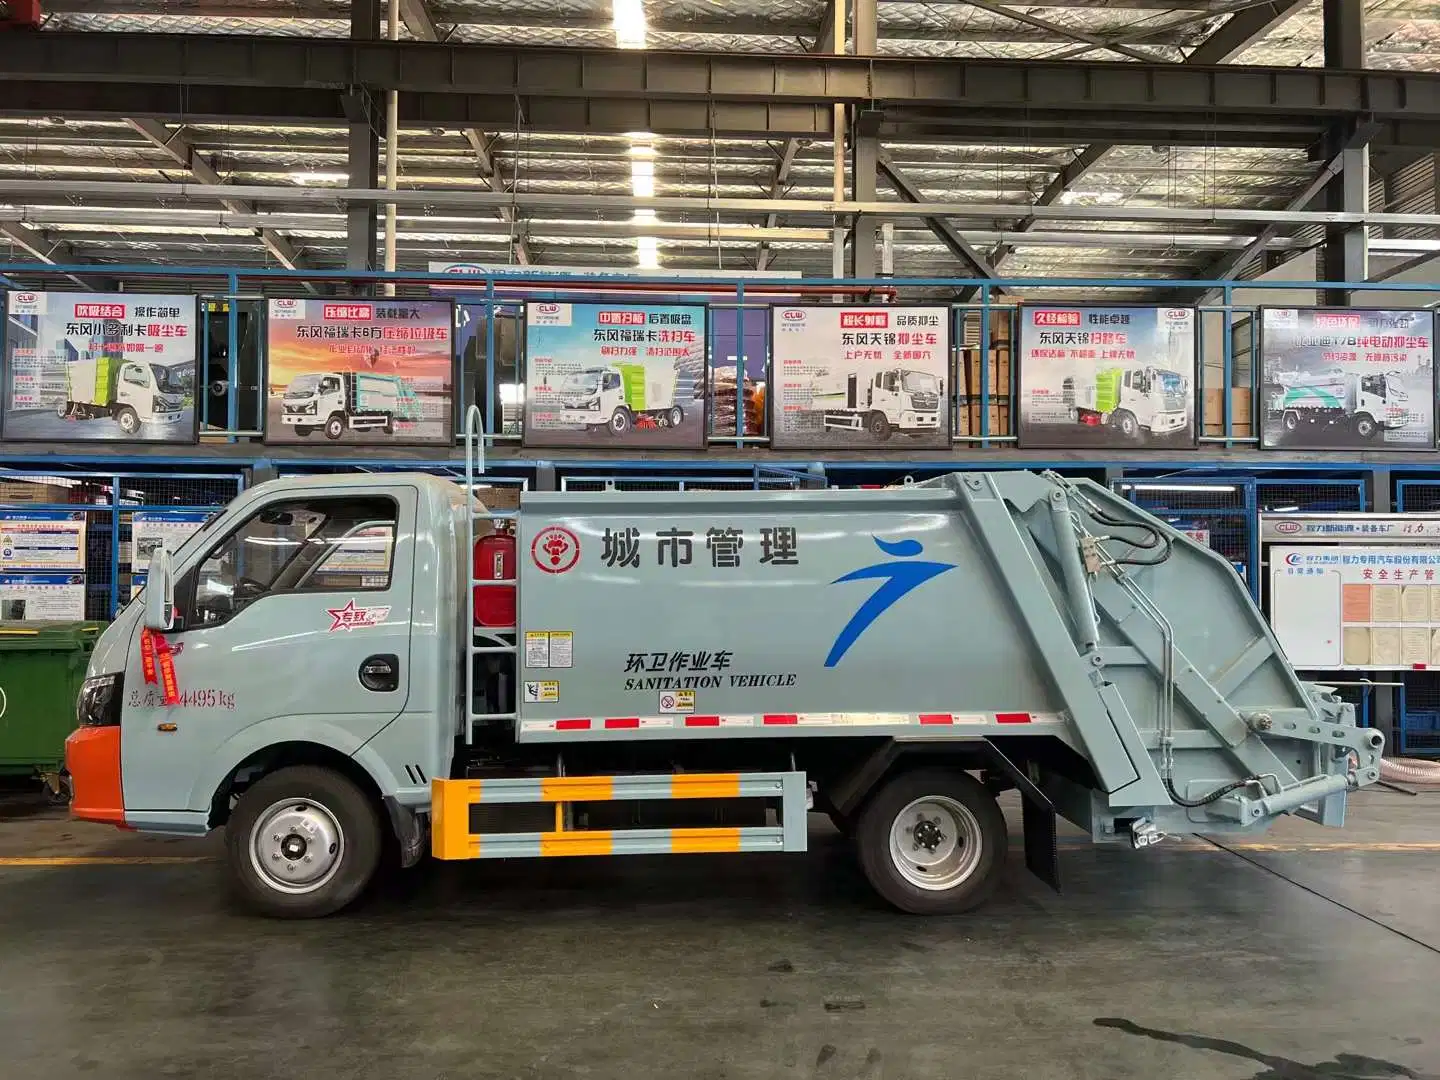 China Brand Refuse Compression Garbage Collection Transport Truck Garbage Transfer Disposal Recycling Waste Management Garbage Truck